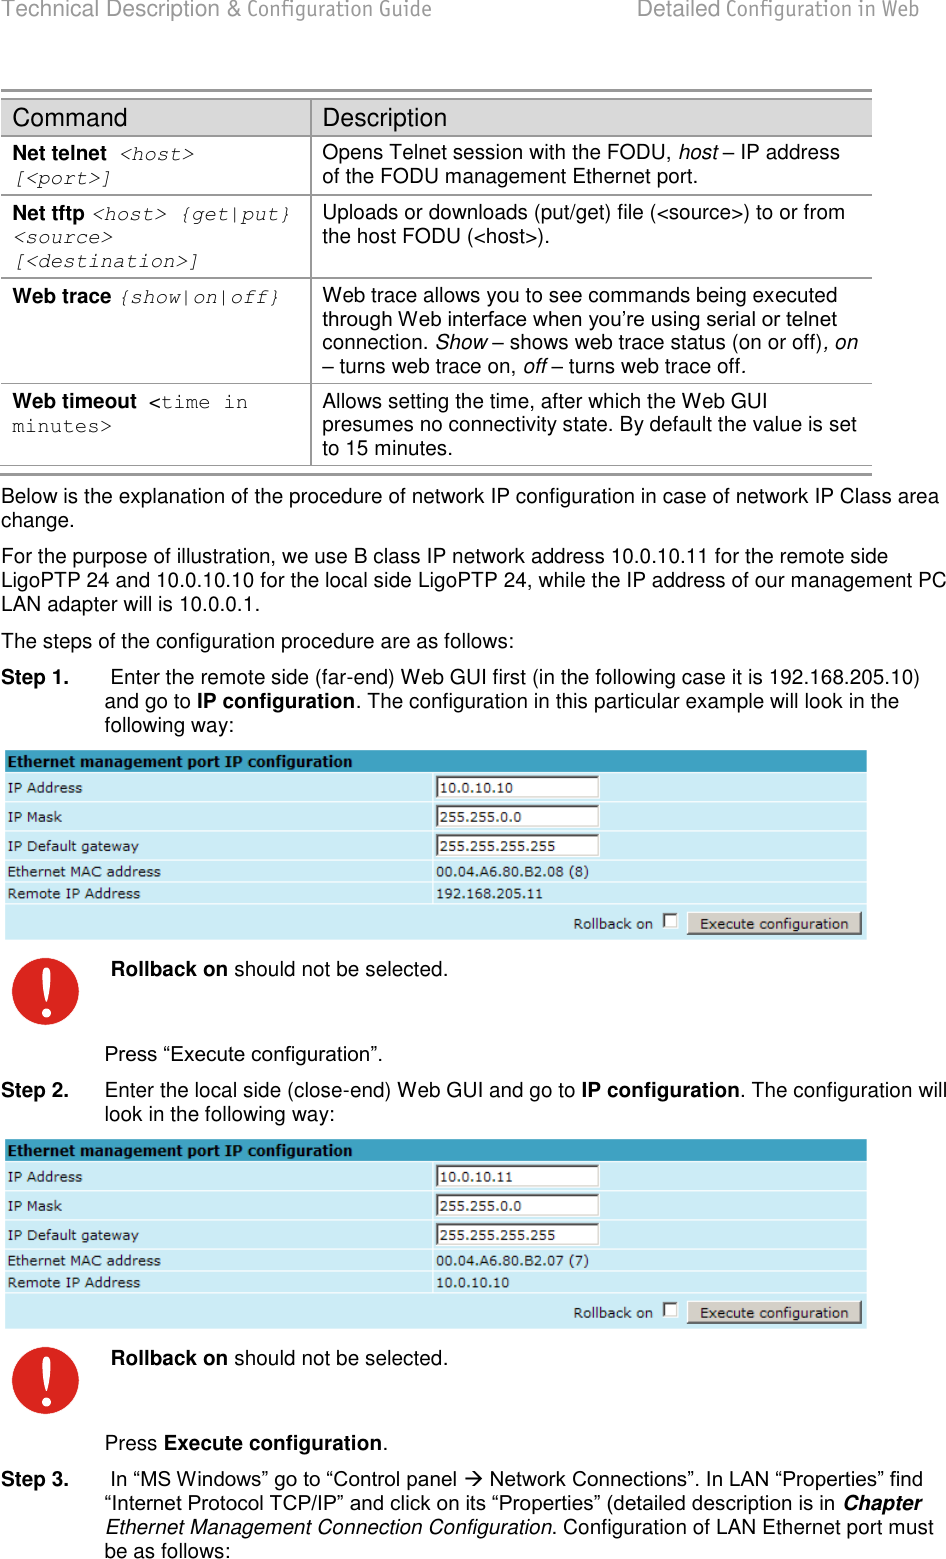 Technical Description &amp; Configuration Guide  Detailed Configuration in Web  LigoWave  Page 46 Command Description Net telnet  &lt;host&gt; [&lt;port&gt;] Opens Telnet session with the FODU, host  IP address of the FODU management Ethernet port. Net tftp &lt;host&gt; {get|put} &lt;source&gt; [&lt;destination&gt;] Uploads or downloads (put/get) file (&lt;source&gt;) to or from the host FODU (&lt;host&gt;). Web trace {show|on|off} Web trace allows you to see commands being executed connection. Show – shows web trace status (on or off), on – turns web trace on, off – turns web trace off. Web timeout  &lt;time in minutes&gt; Allows setting the time, after which the Web GUI presumes no connectivity state. By default the value is set to 15 minutes. Below is the explanation of the procedure of network IP configuration in case of network IP Class area change. For the purpose of illustration, we use B class IP network address 10.0.10.11 for the remote side LigoPTP 24 and 10.0.10.10 for the local side LigoPTP 24, while the IP address of our management PC LAN adapter will is 10.0.0.1. The steps of the configuration procedure are as follows: Step 1.   Enter the remote side (far-end) Web GUI first (in the following case it is 192.168.205.10) and go to IP configuration. The configuration in this particular example will look in the following way:   Rollback on should not be selected.  Step 2.  Enter the local side (close-end) Web GUI and go to IP configuration. The configuration will look in the following way:   Rollback on should not be selected. Press Execute configuration. Step 3.    Chapter Ethernet Management Connection Configuration. Configuration of LAN Ethernet port must be as follows: 